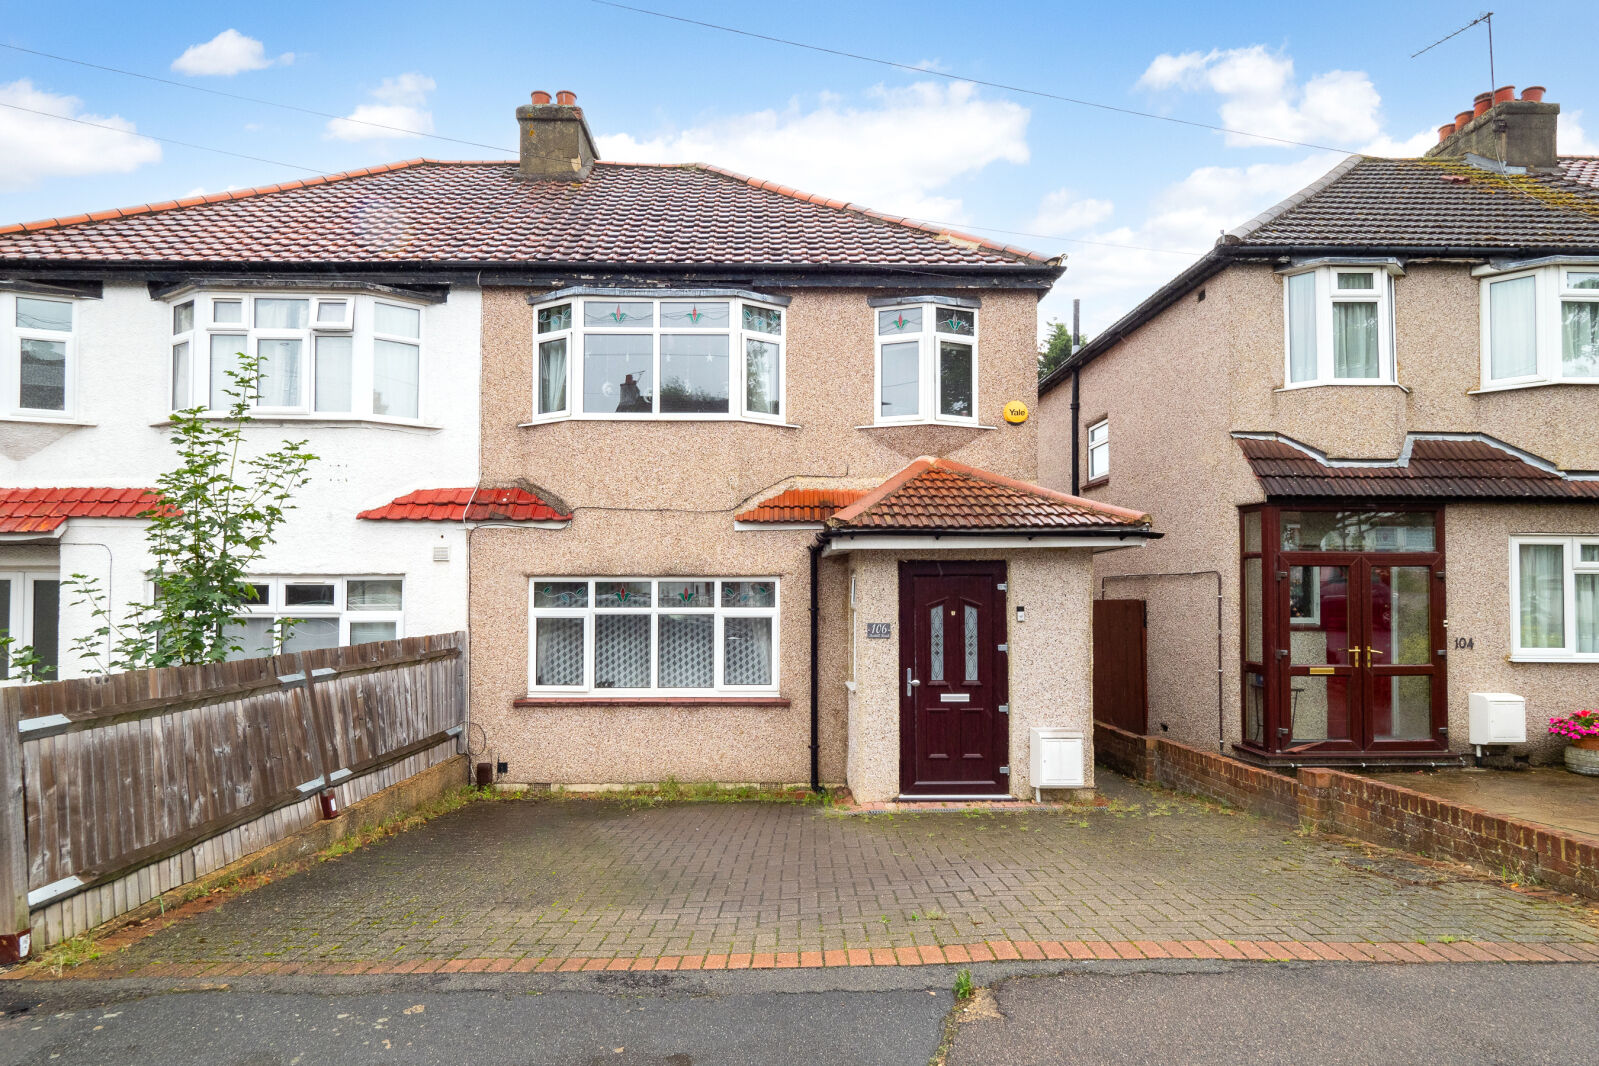 3 bedroom semi detached house for sale Benhill Road, Sutton, SM1, main image